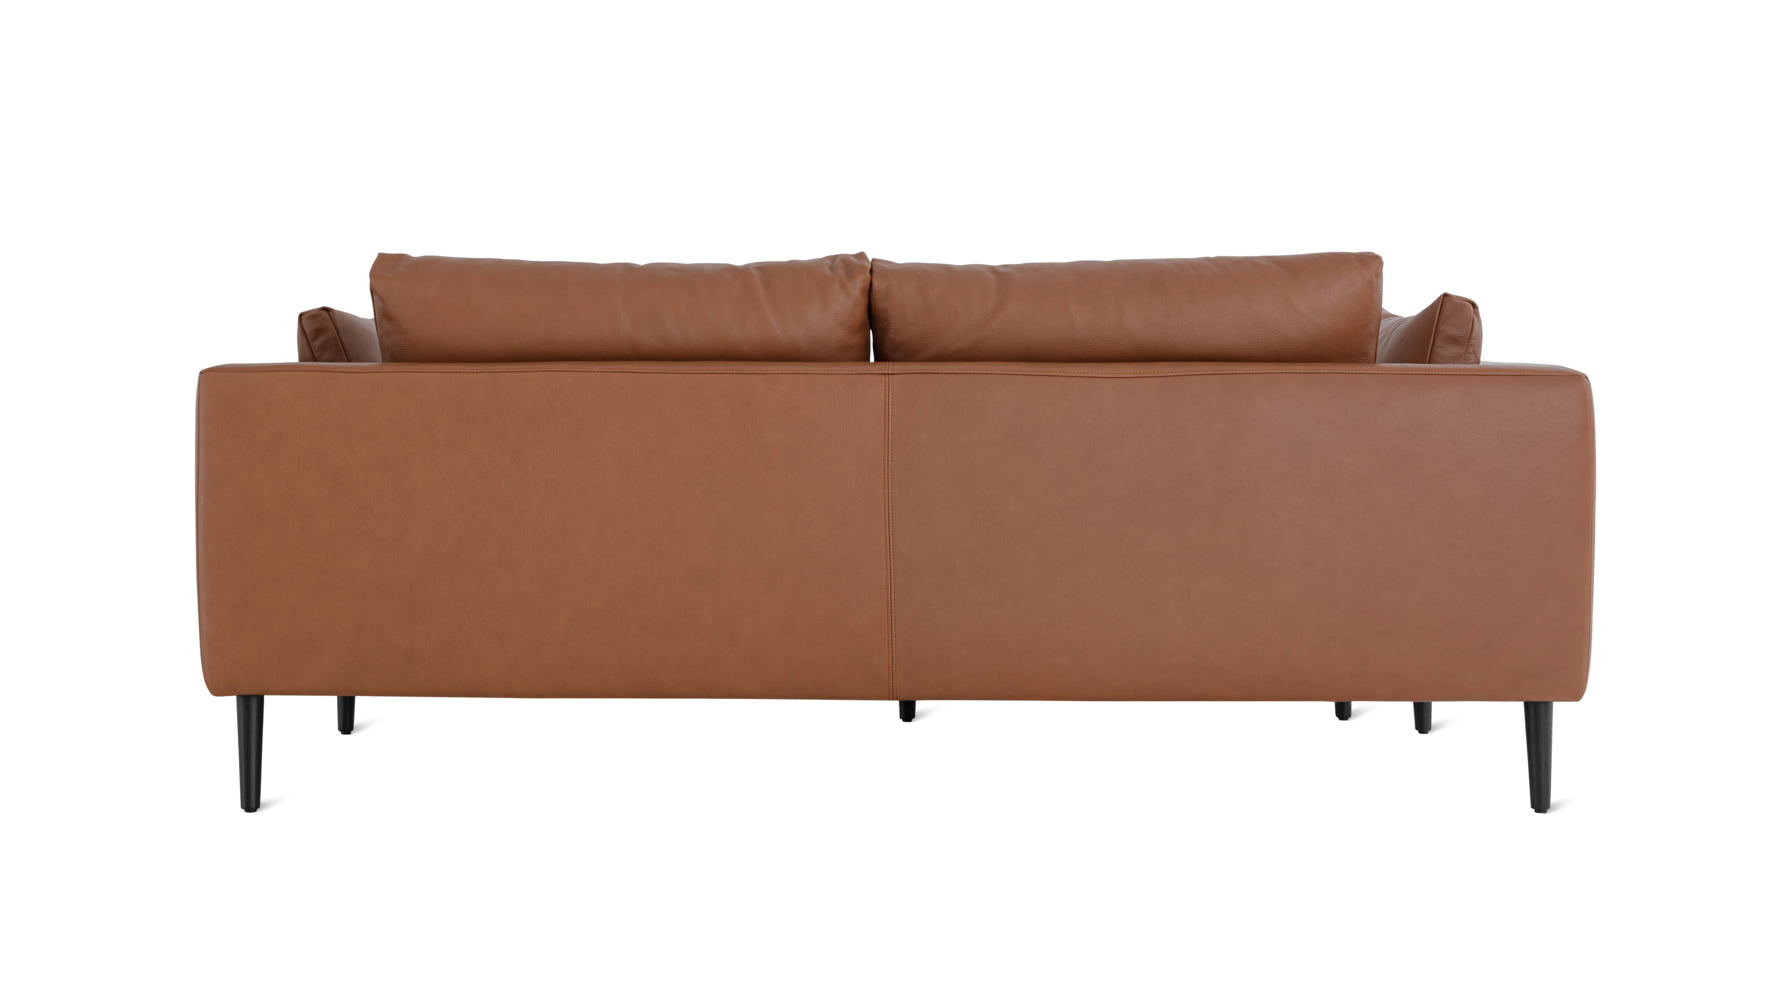 Stay A While Sectional, 2.5 Seater, Cigar - Image 4